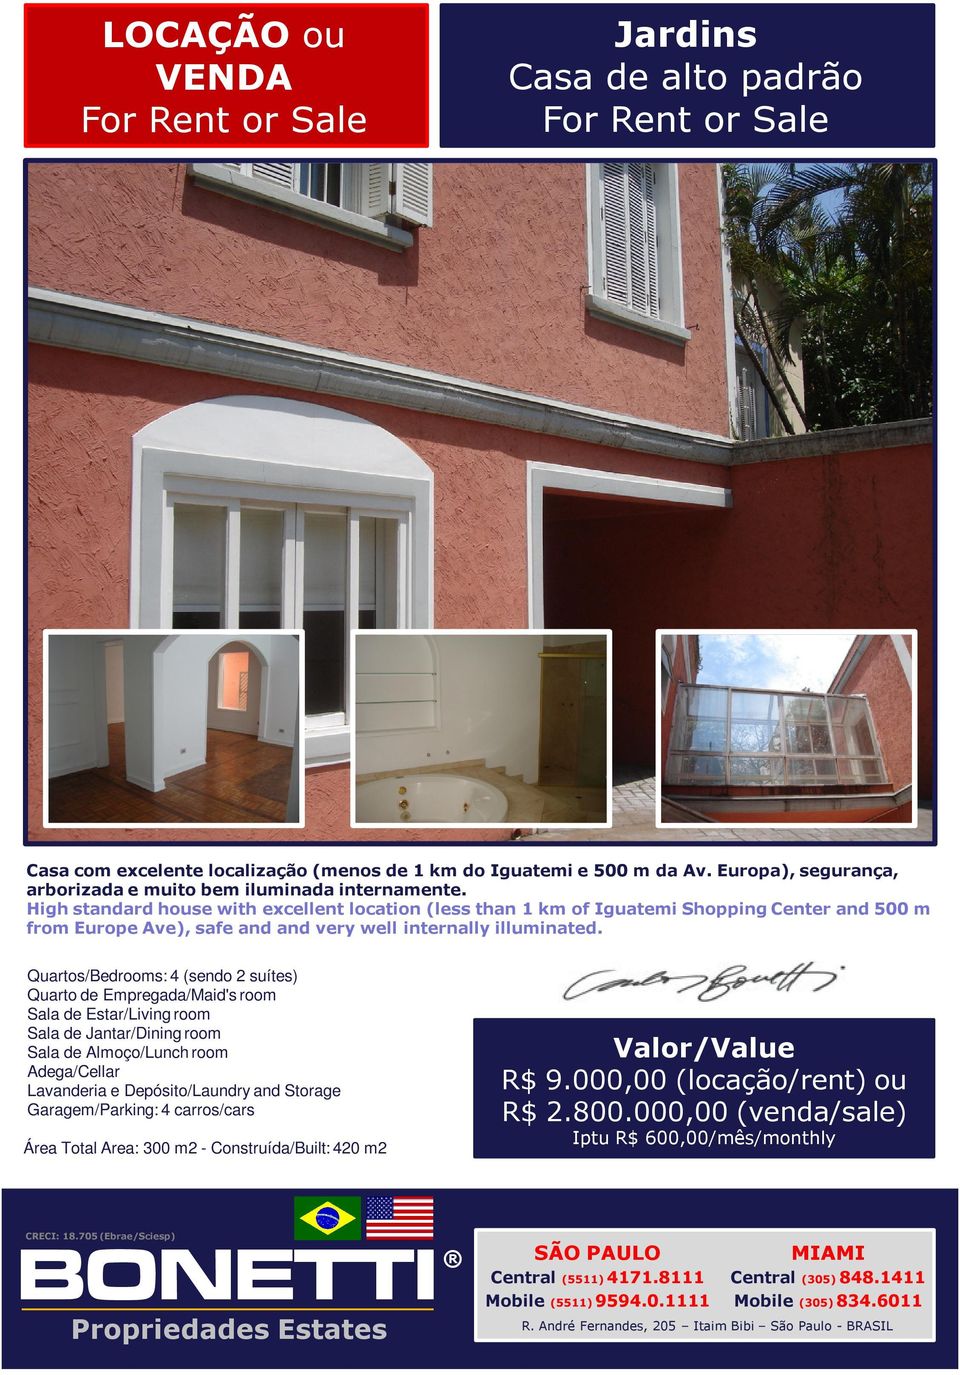 High standard house with excellent location (less than 1 km of Iguatemi Shopping Center and 500 m from Europe Ave), safe and and very well internally illuminated.